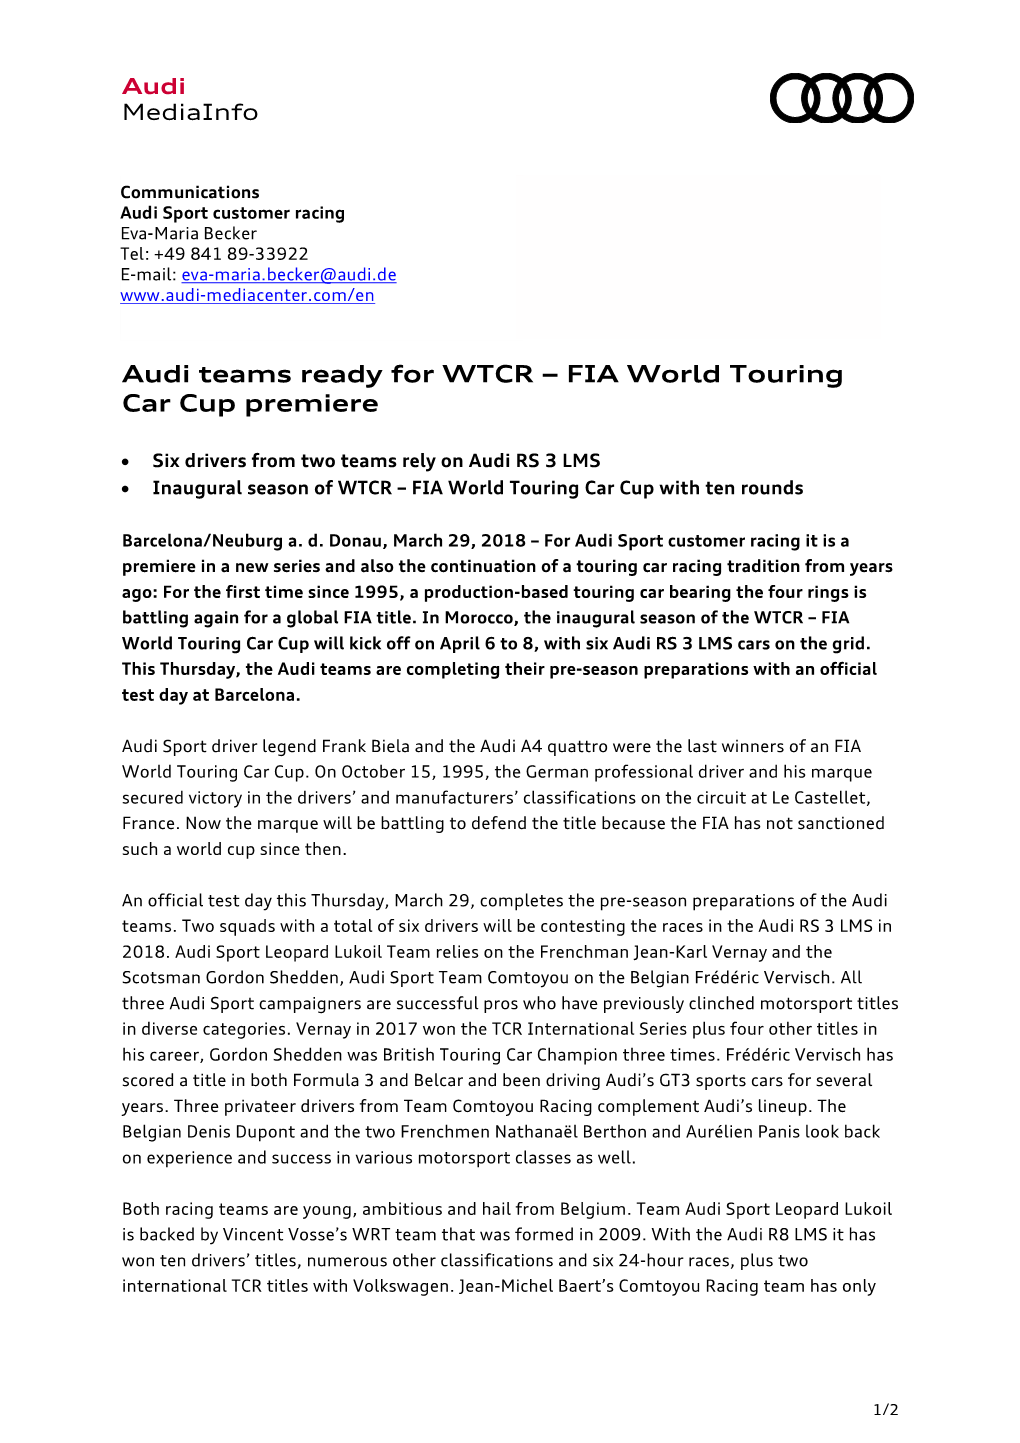 Audi Teams Ready for WTCR – FIA World Touring Car Cup Premiere